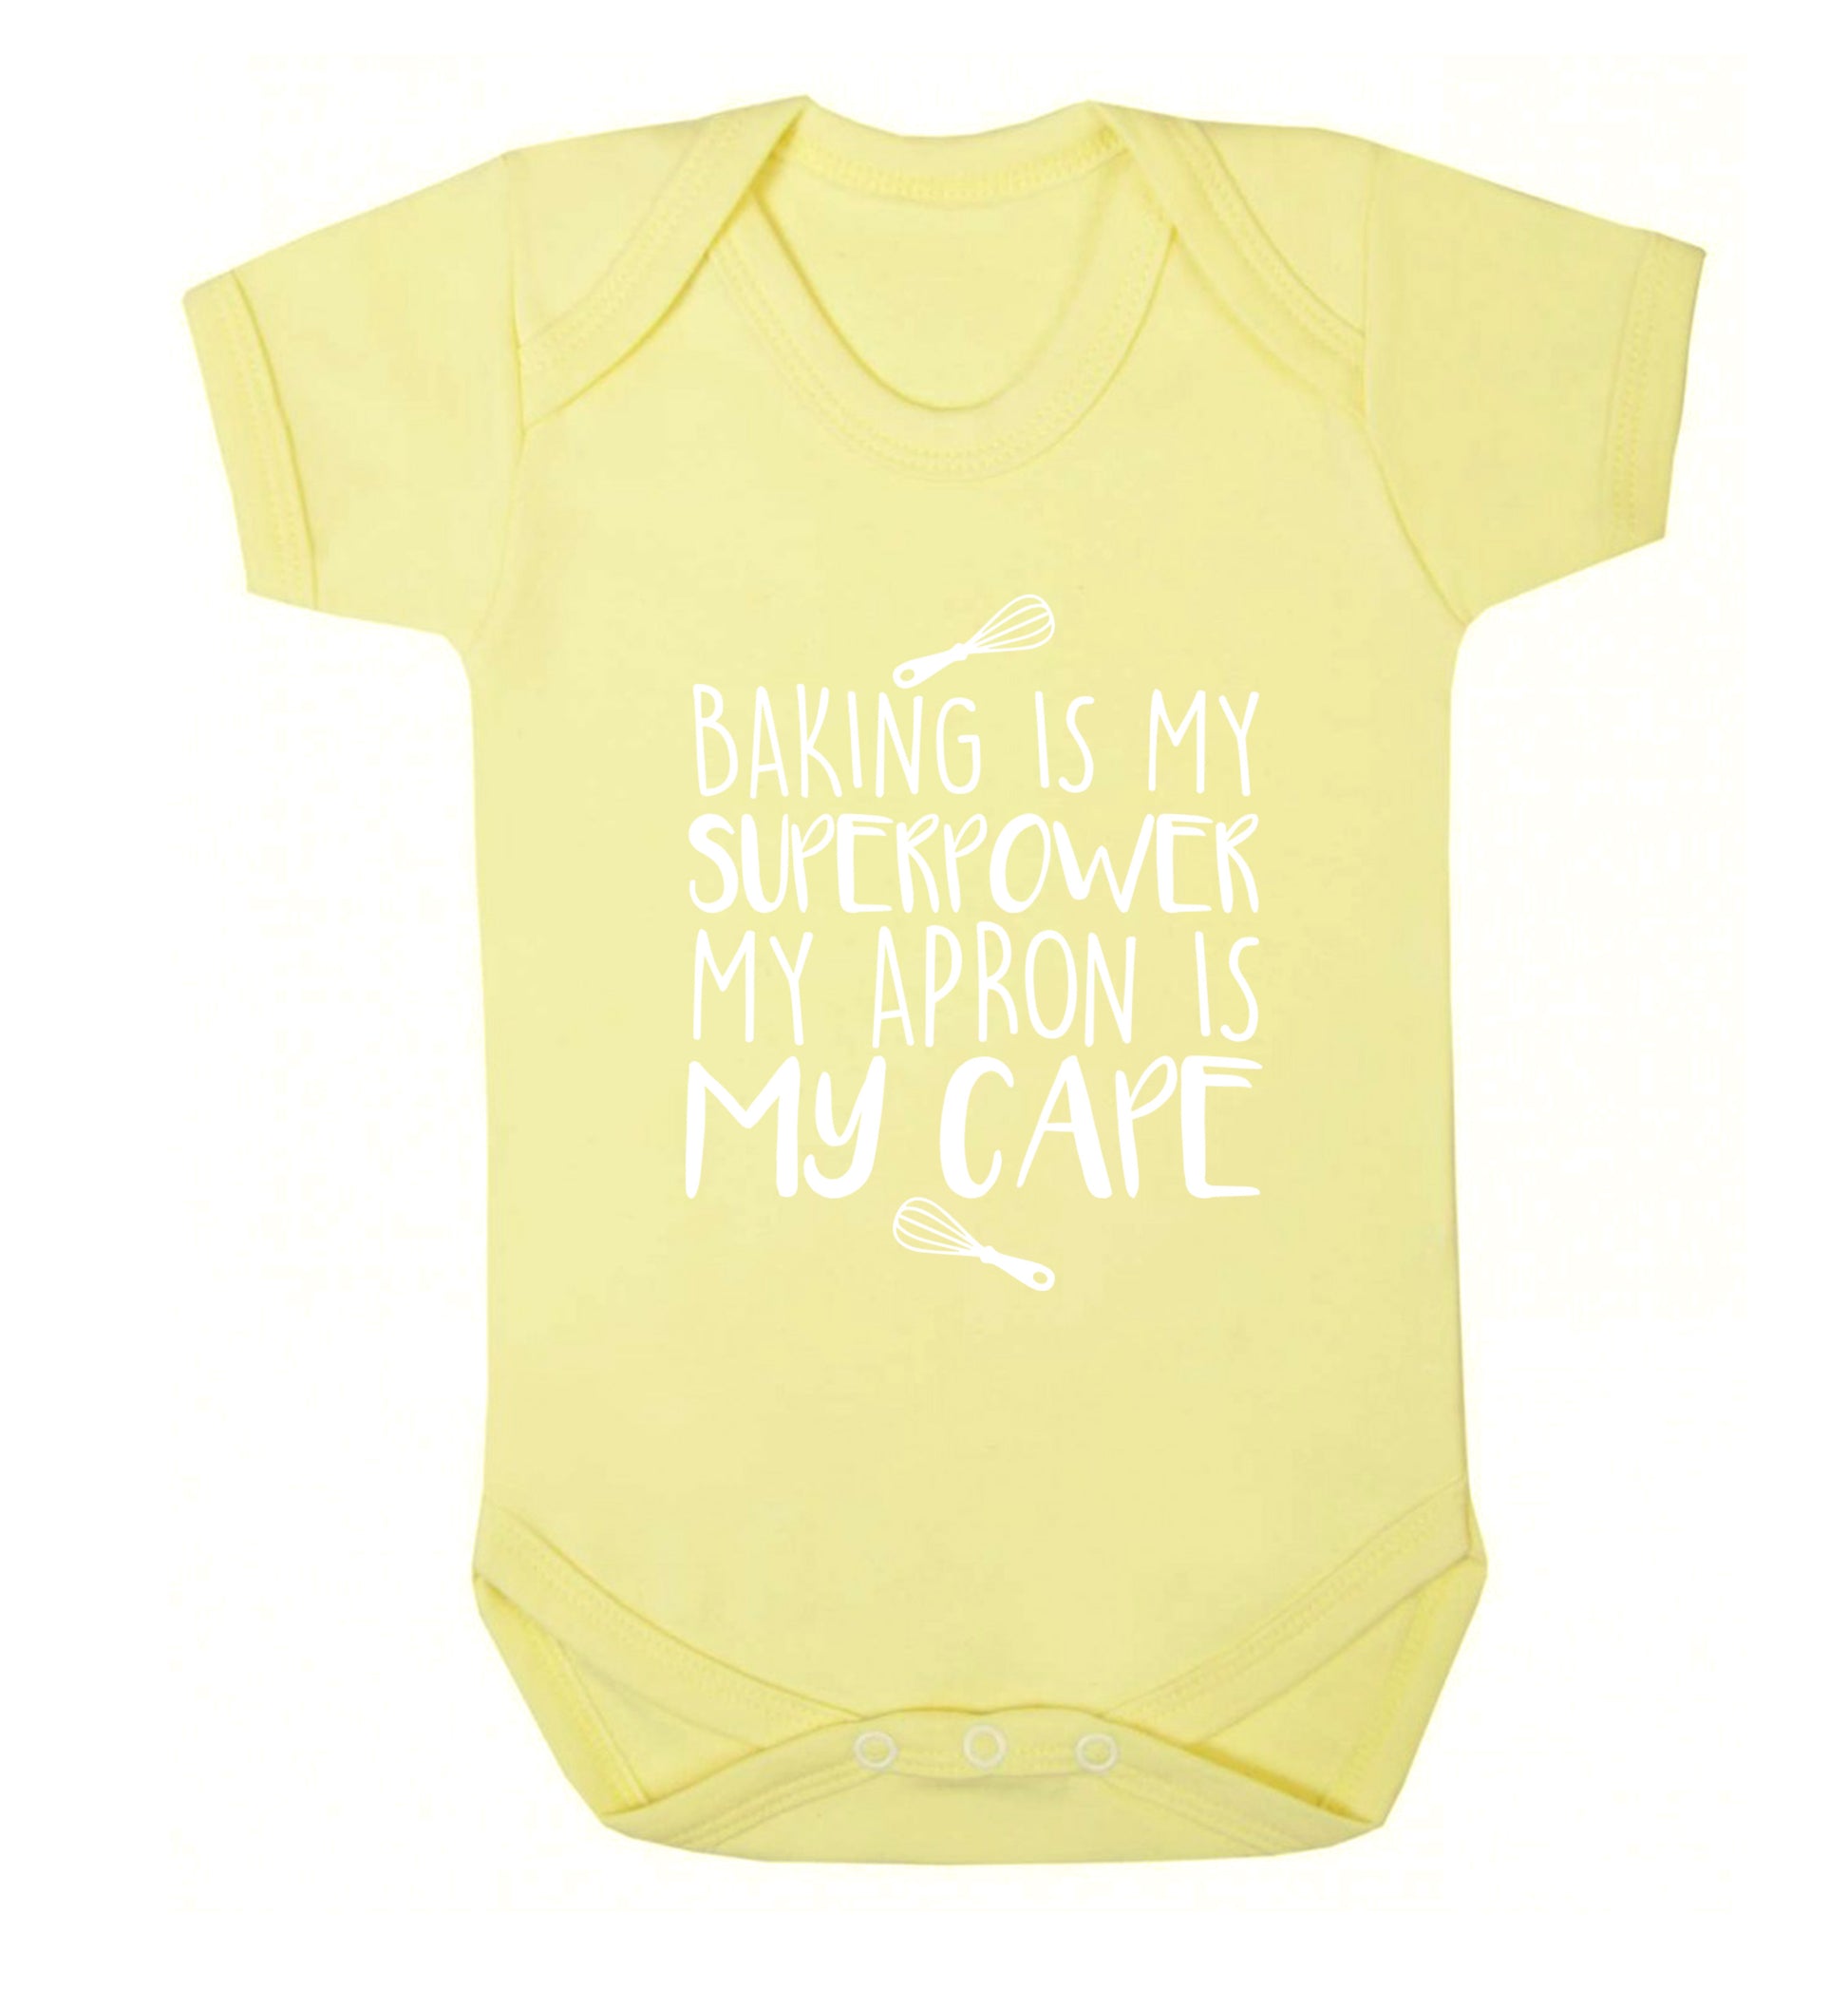 Baking is my superpower my apron is my cape Baby Vest pale yellow 18-24 months